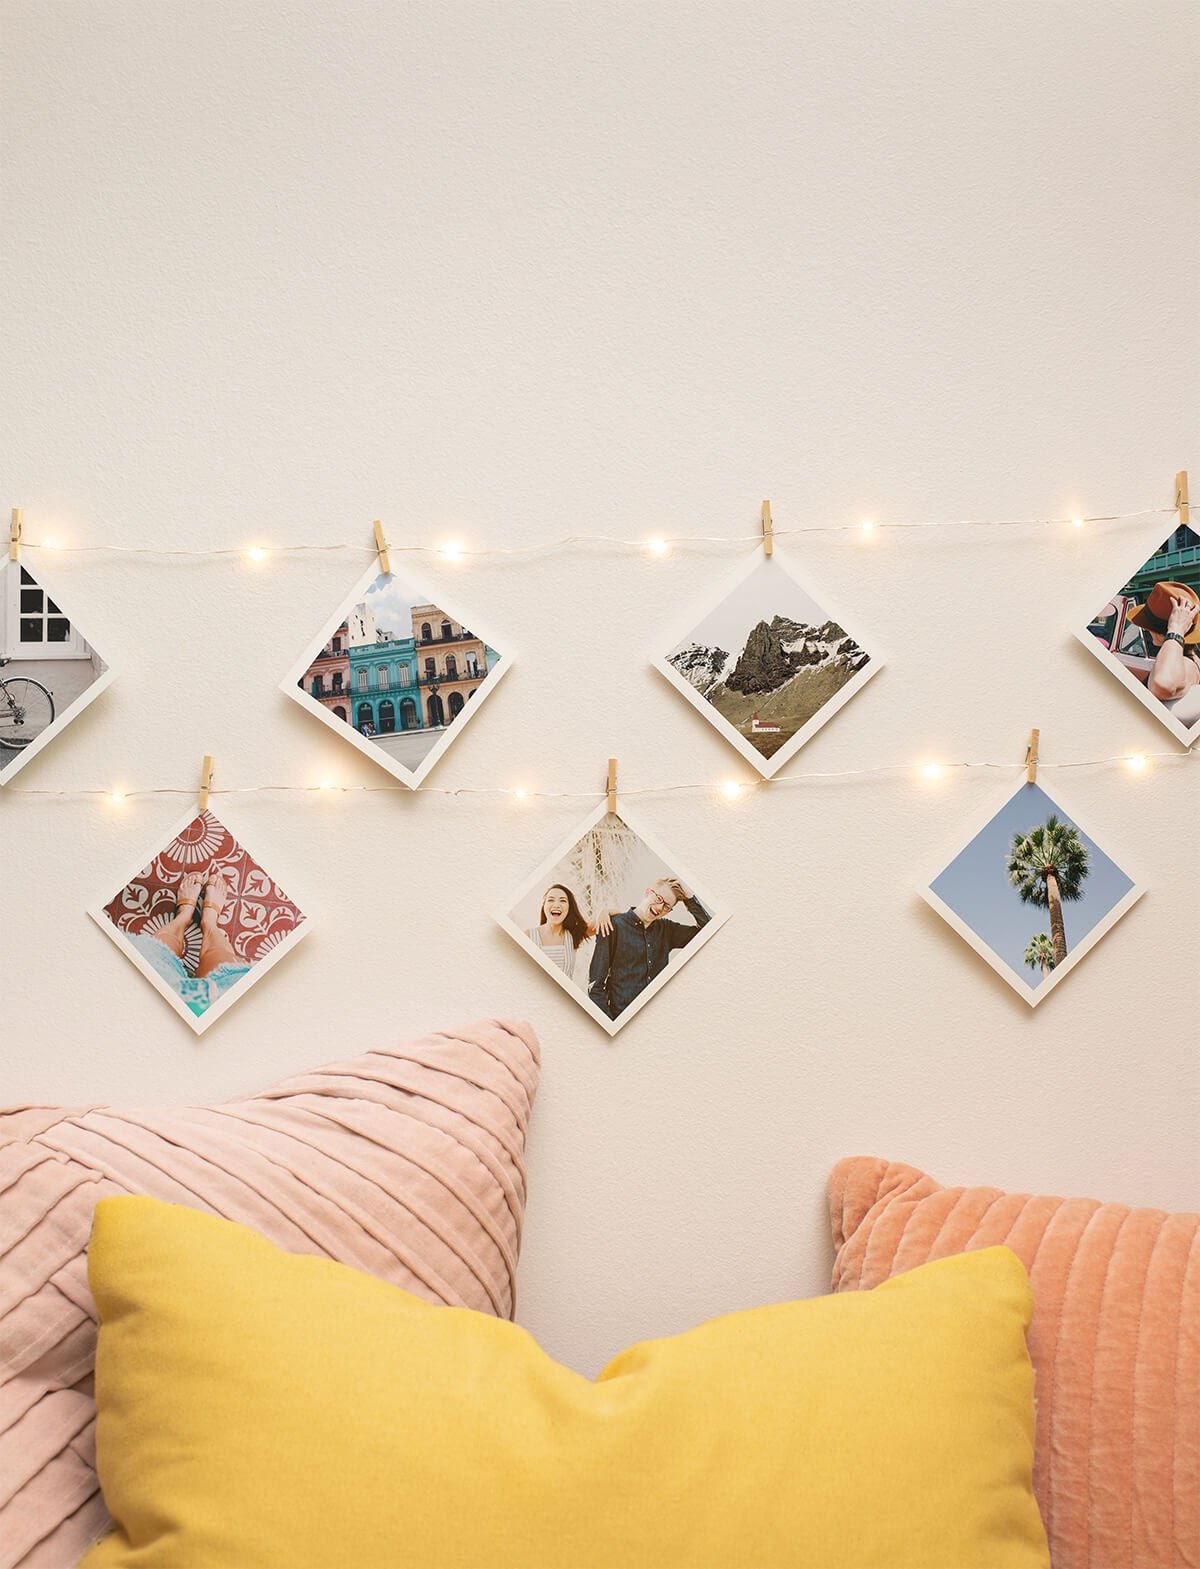 Photo prints hanging from string lights